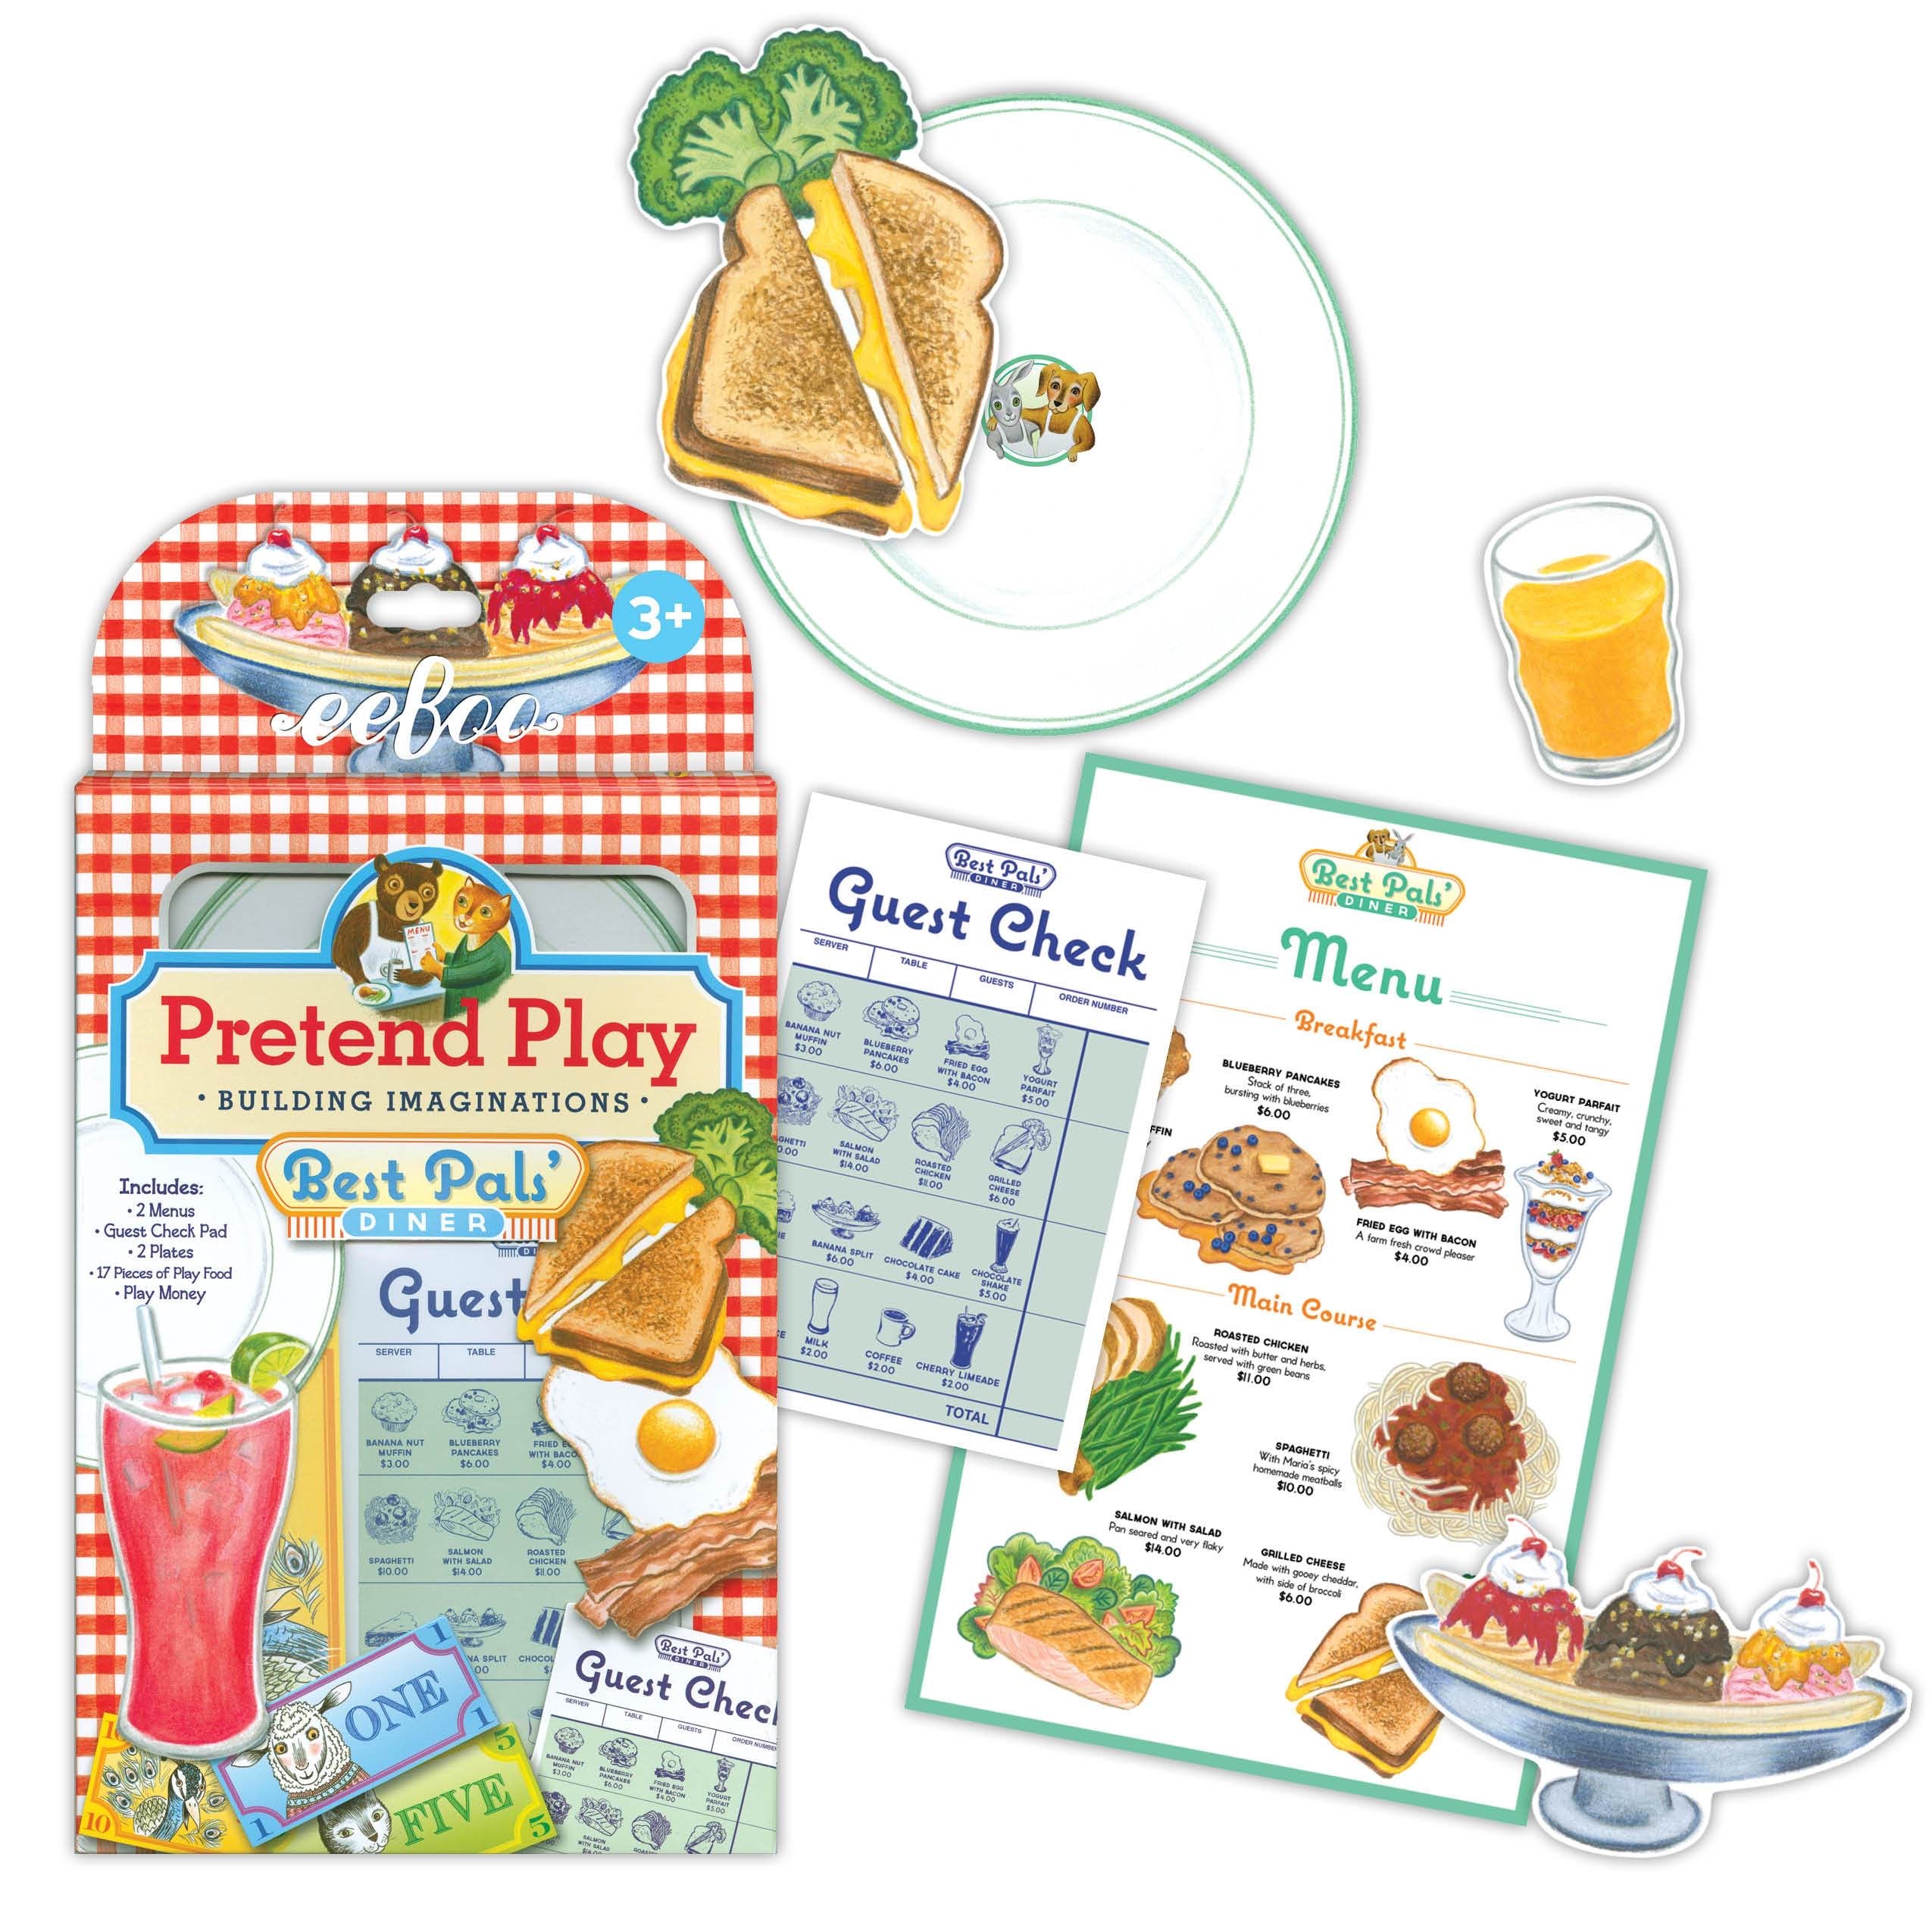 Diner - Pretend Play Props for Make Believe    